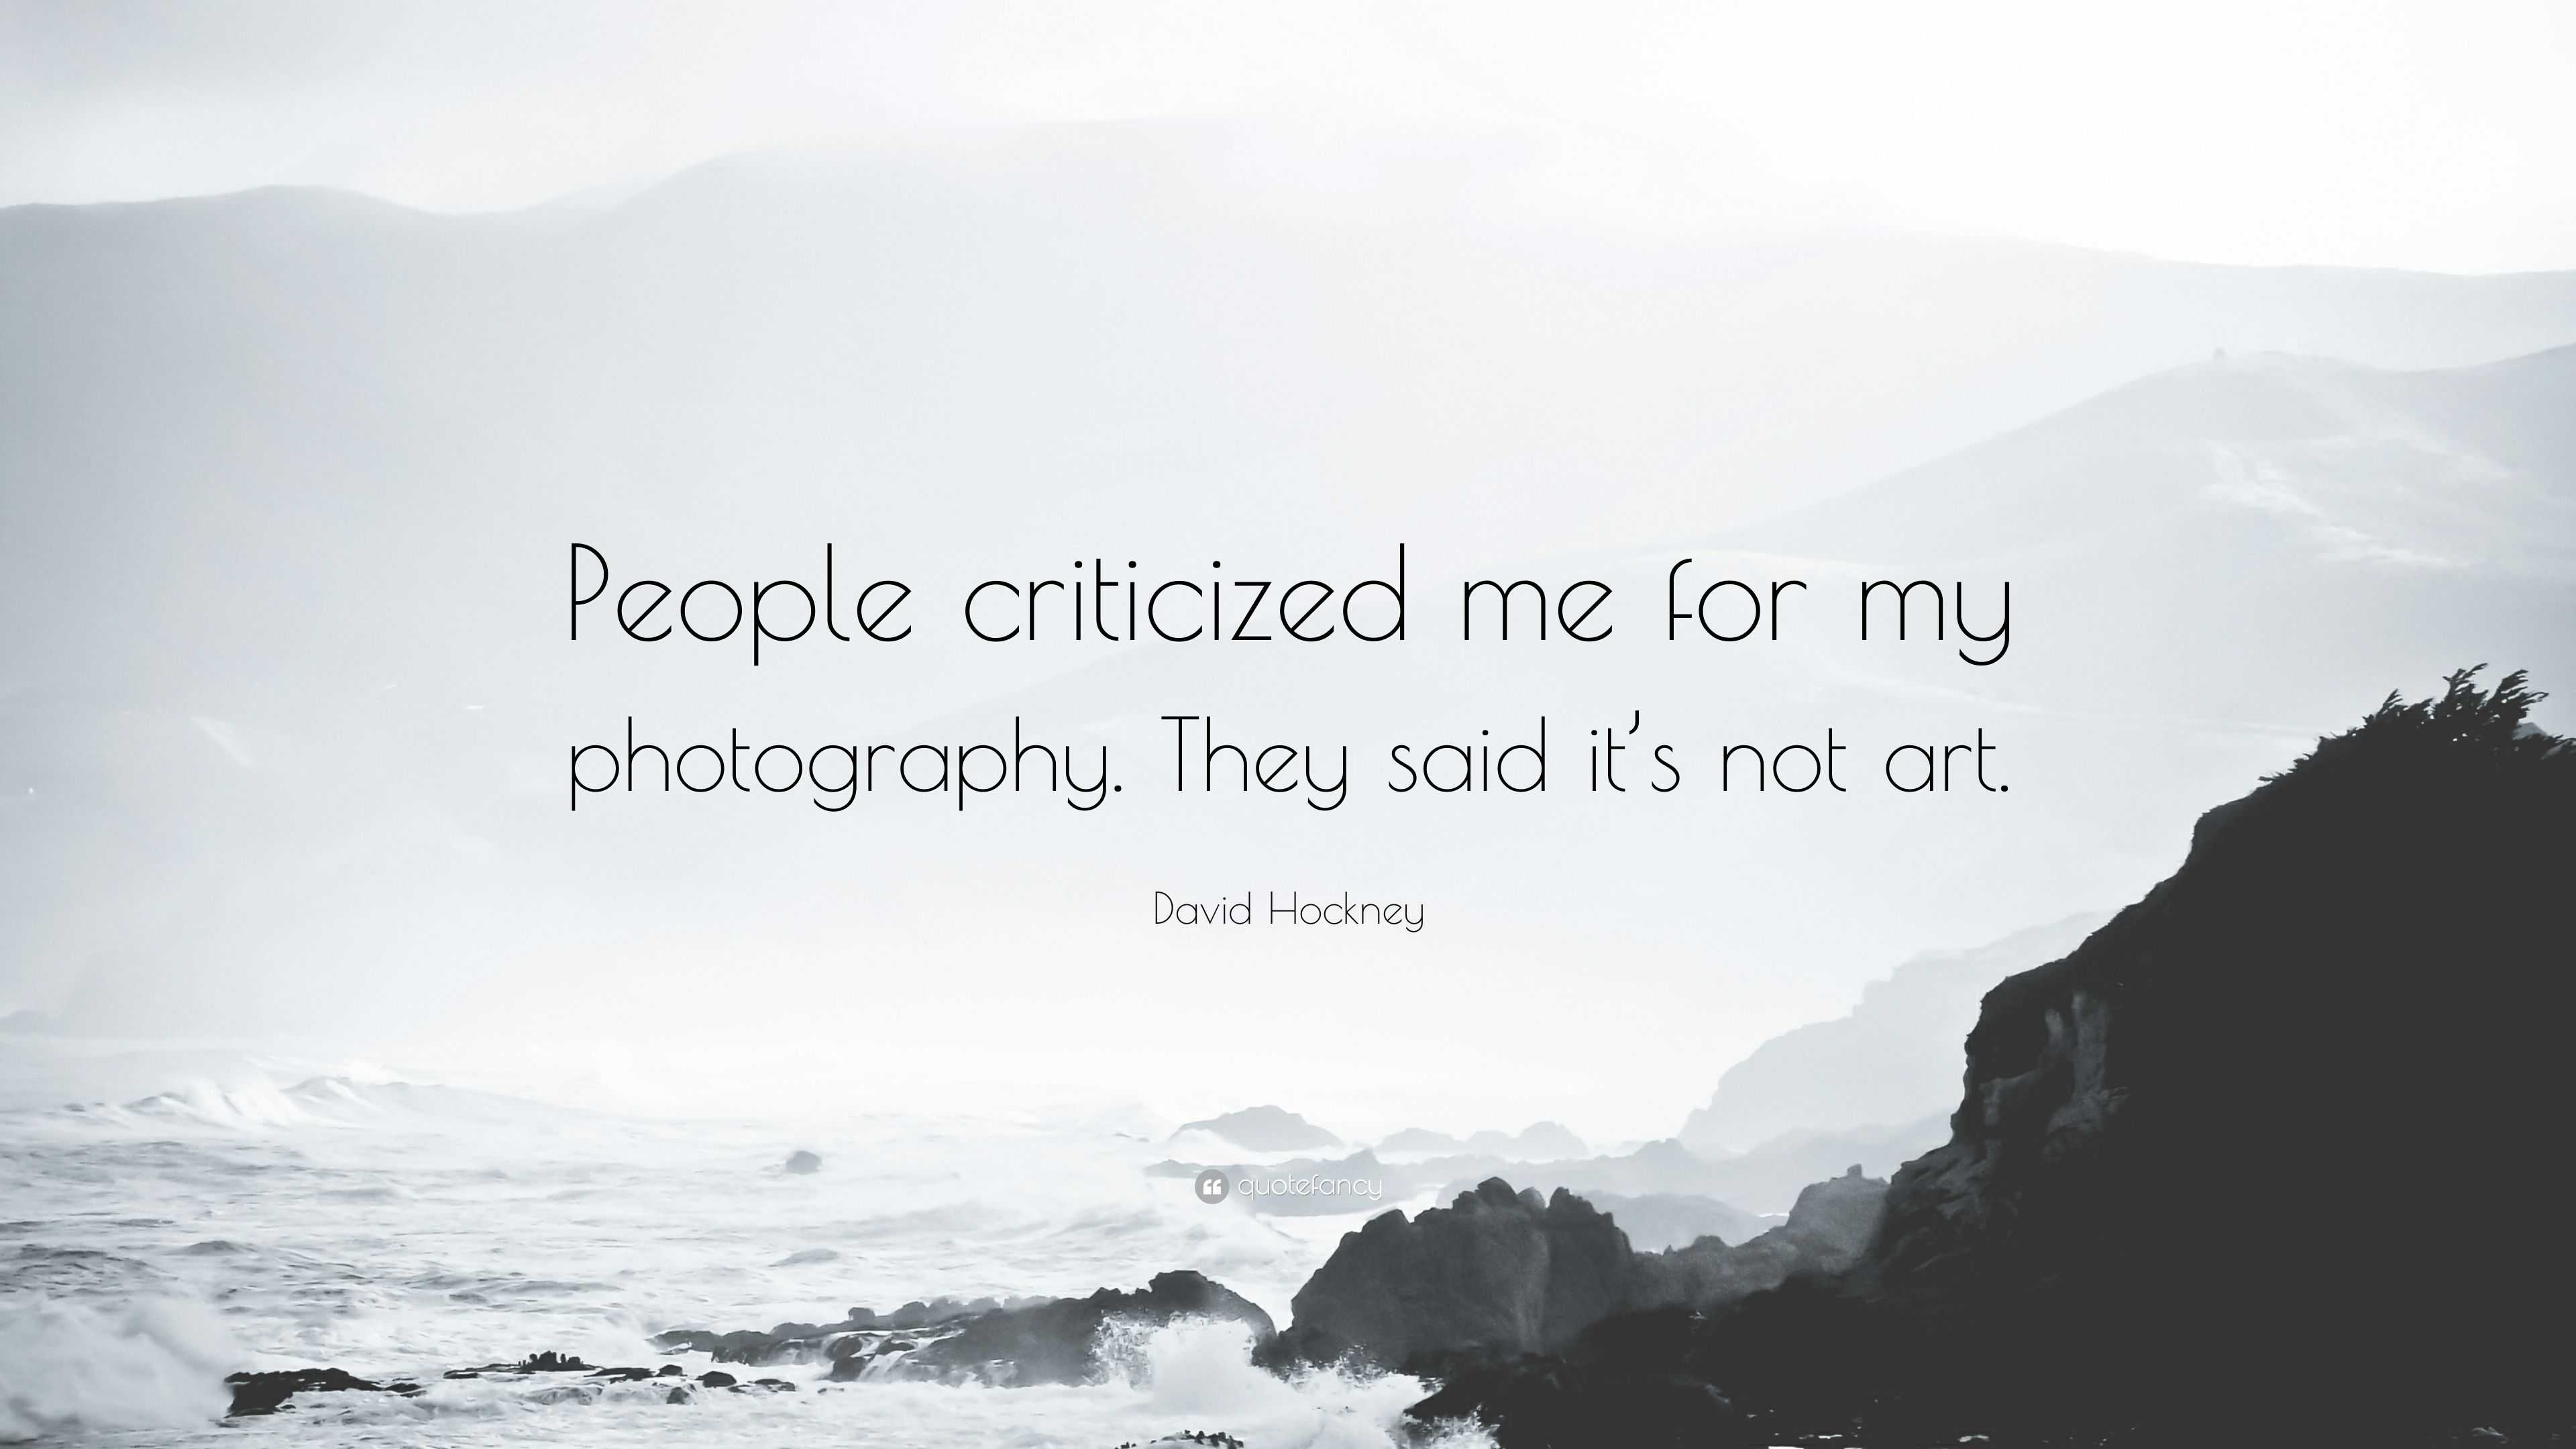 David Hockney Quote: “People criticized me for my photography. They ...